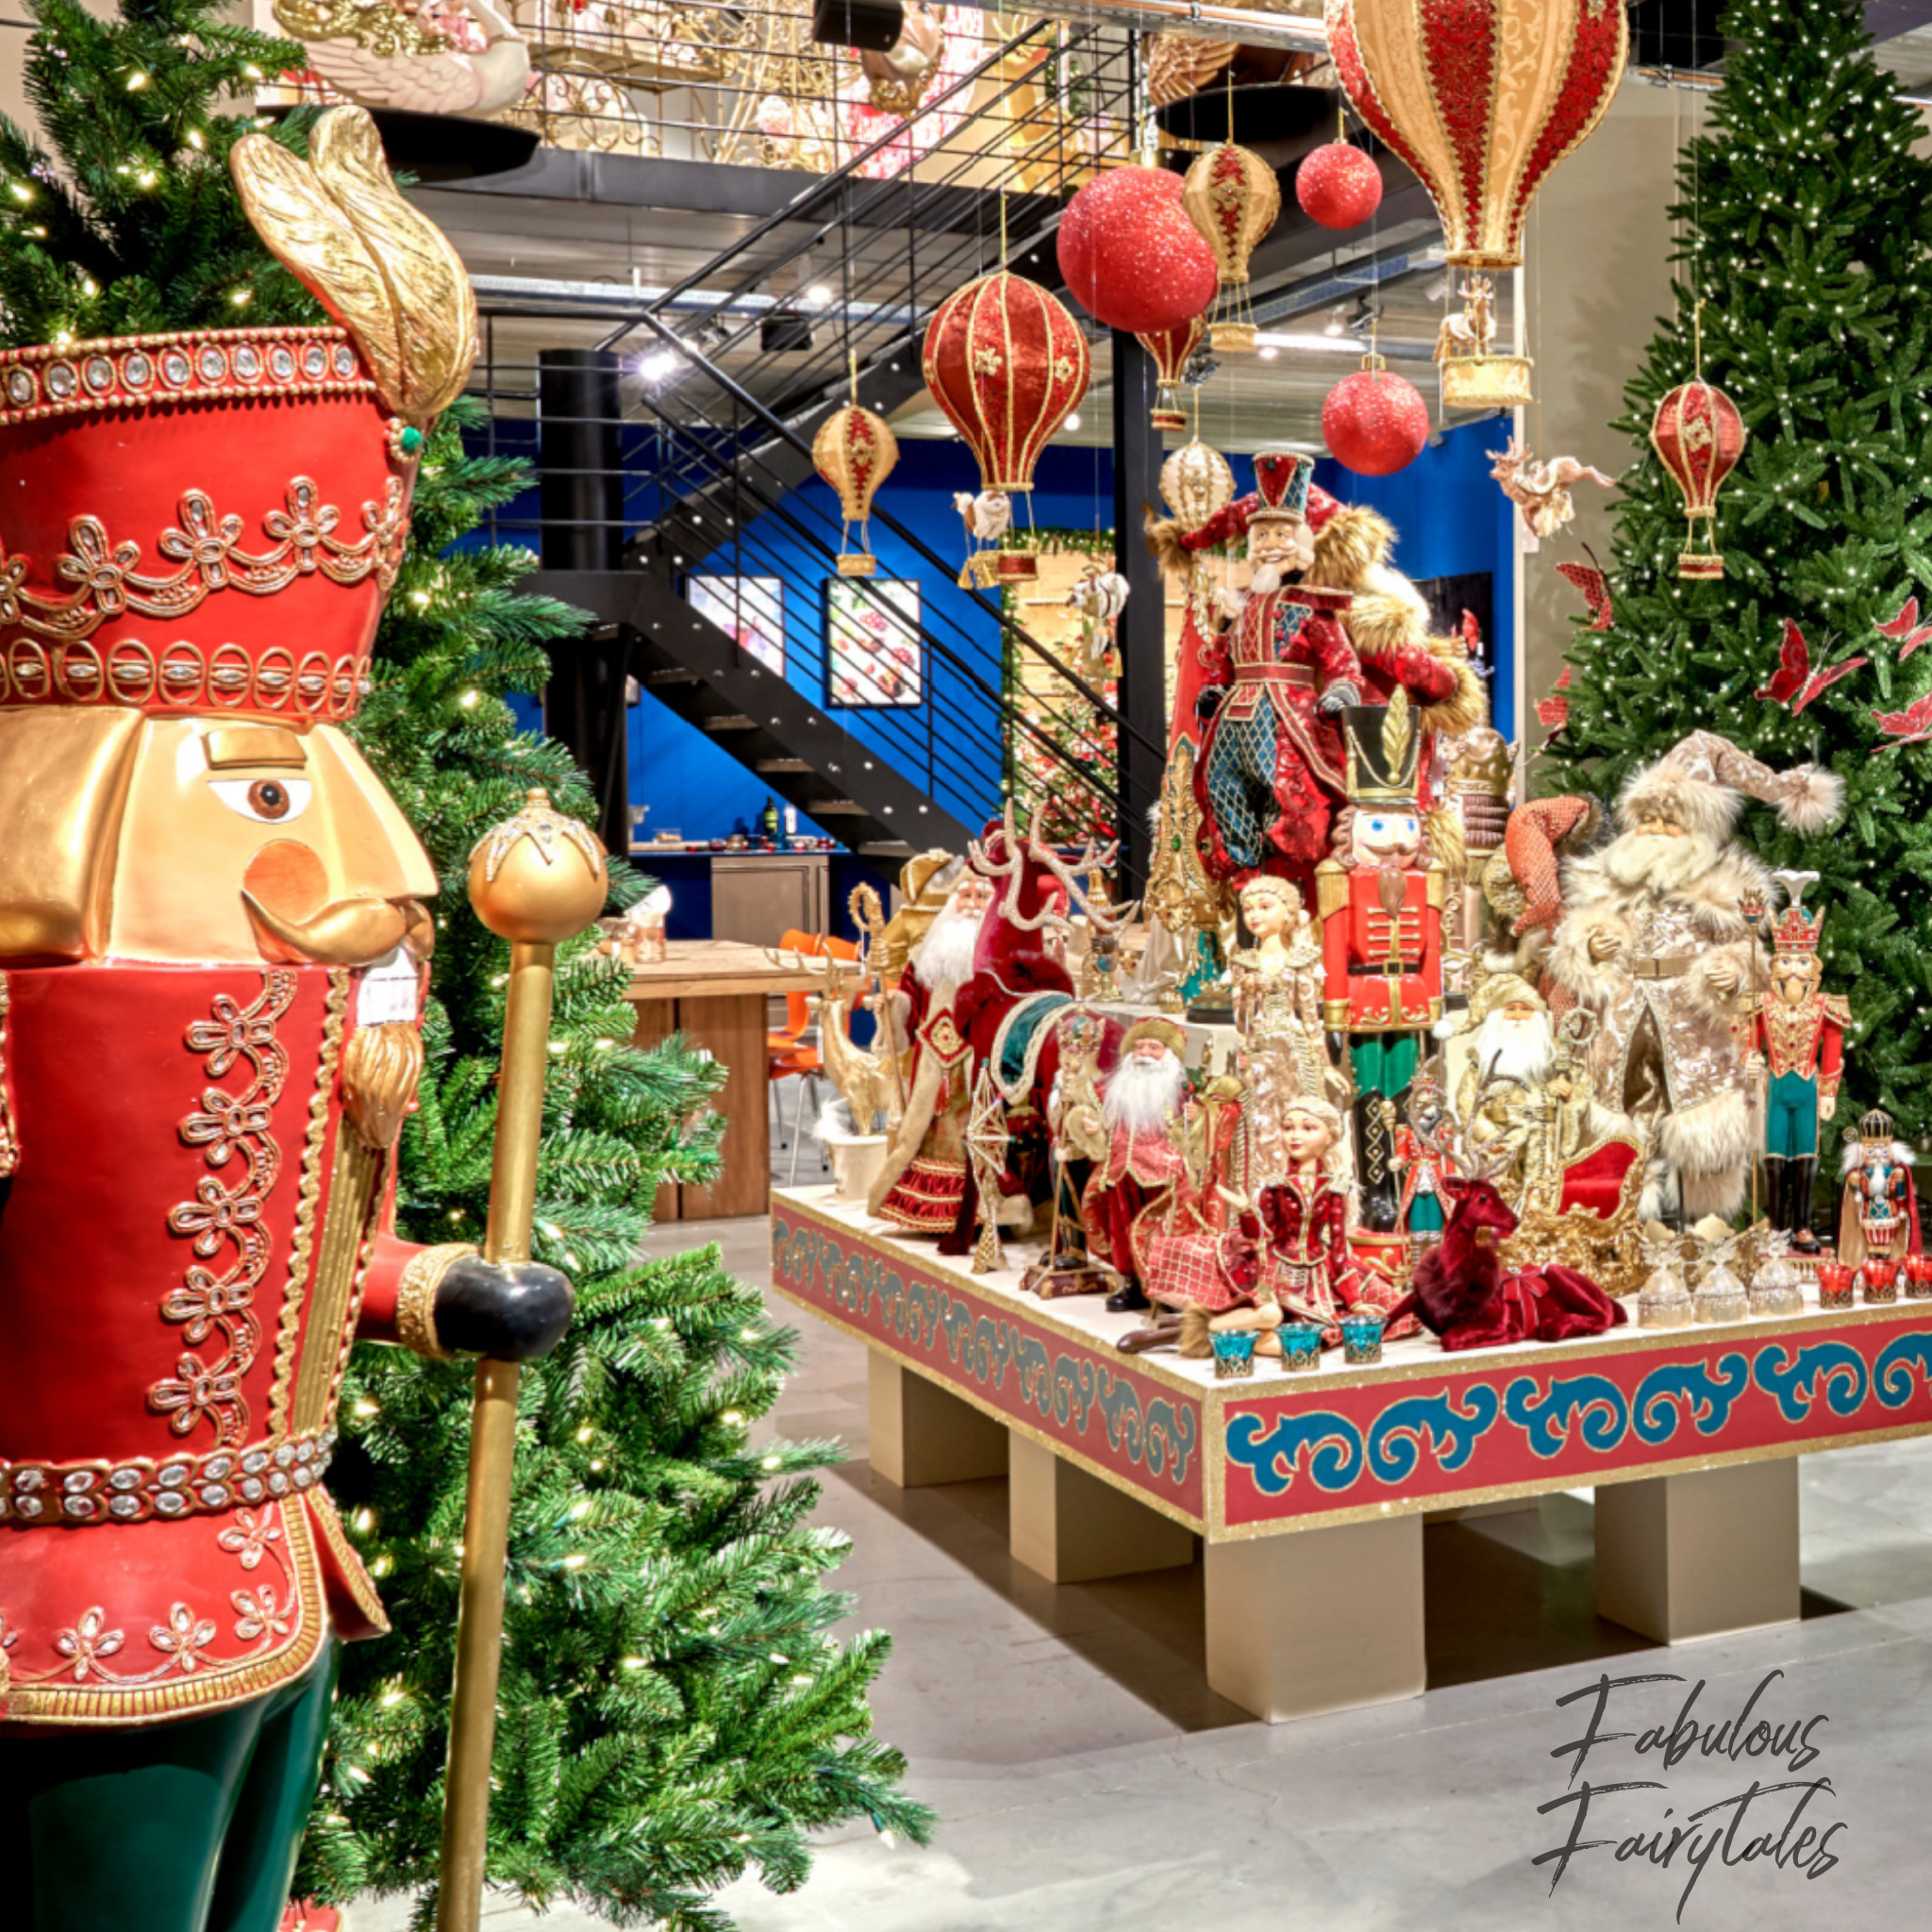 Which London Store Has The Best Christmas Department?